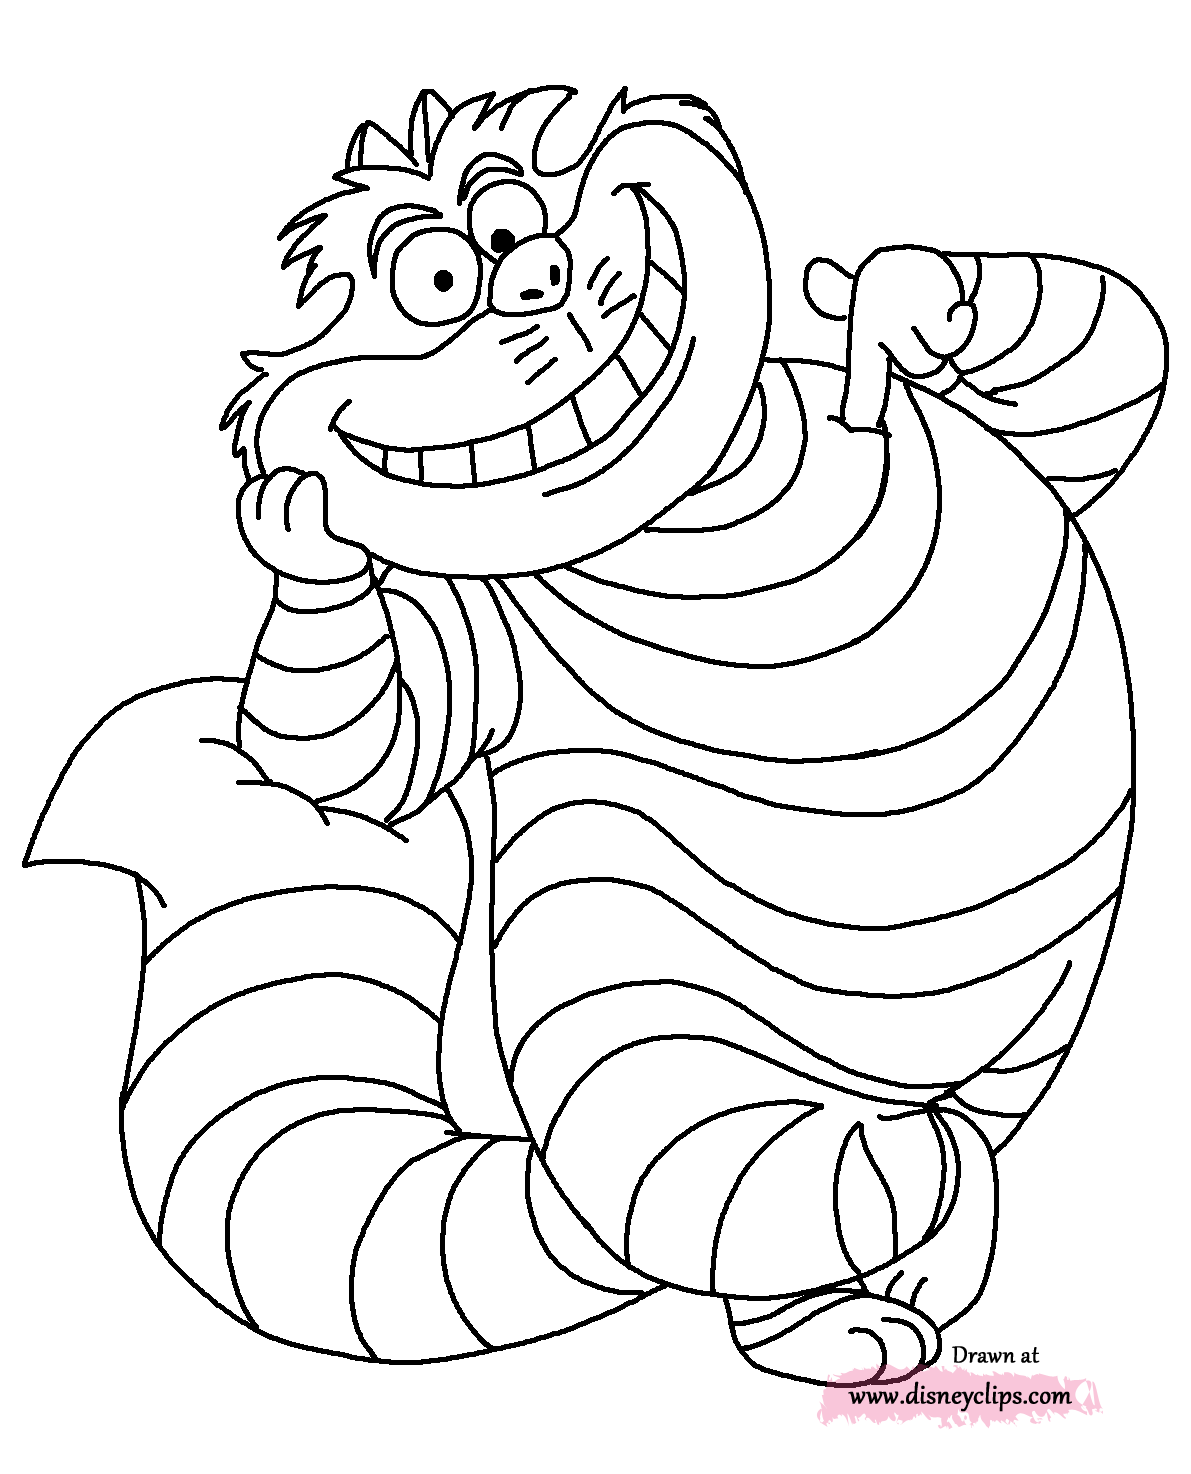 Cheshire Cat Coloring Page